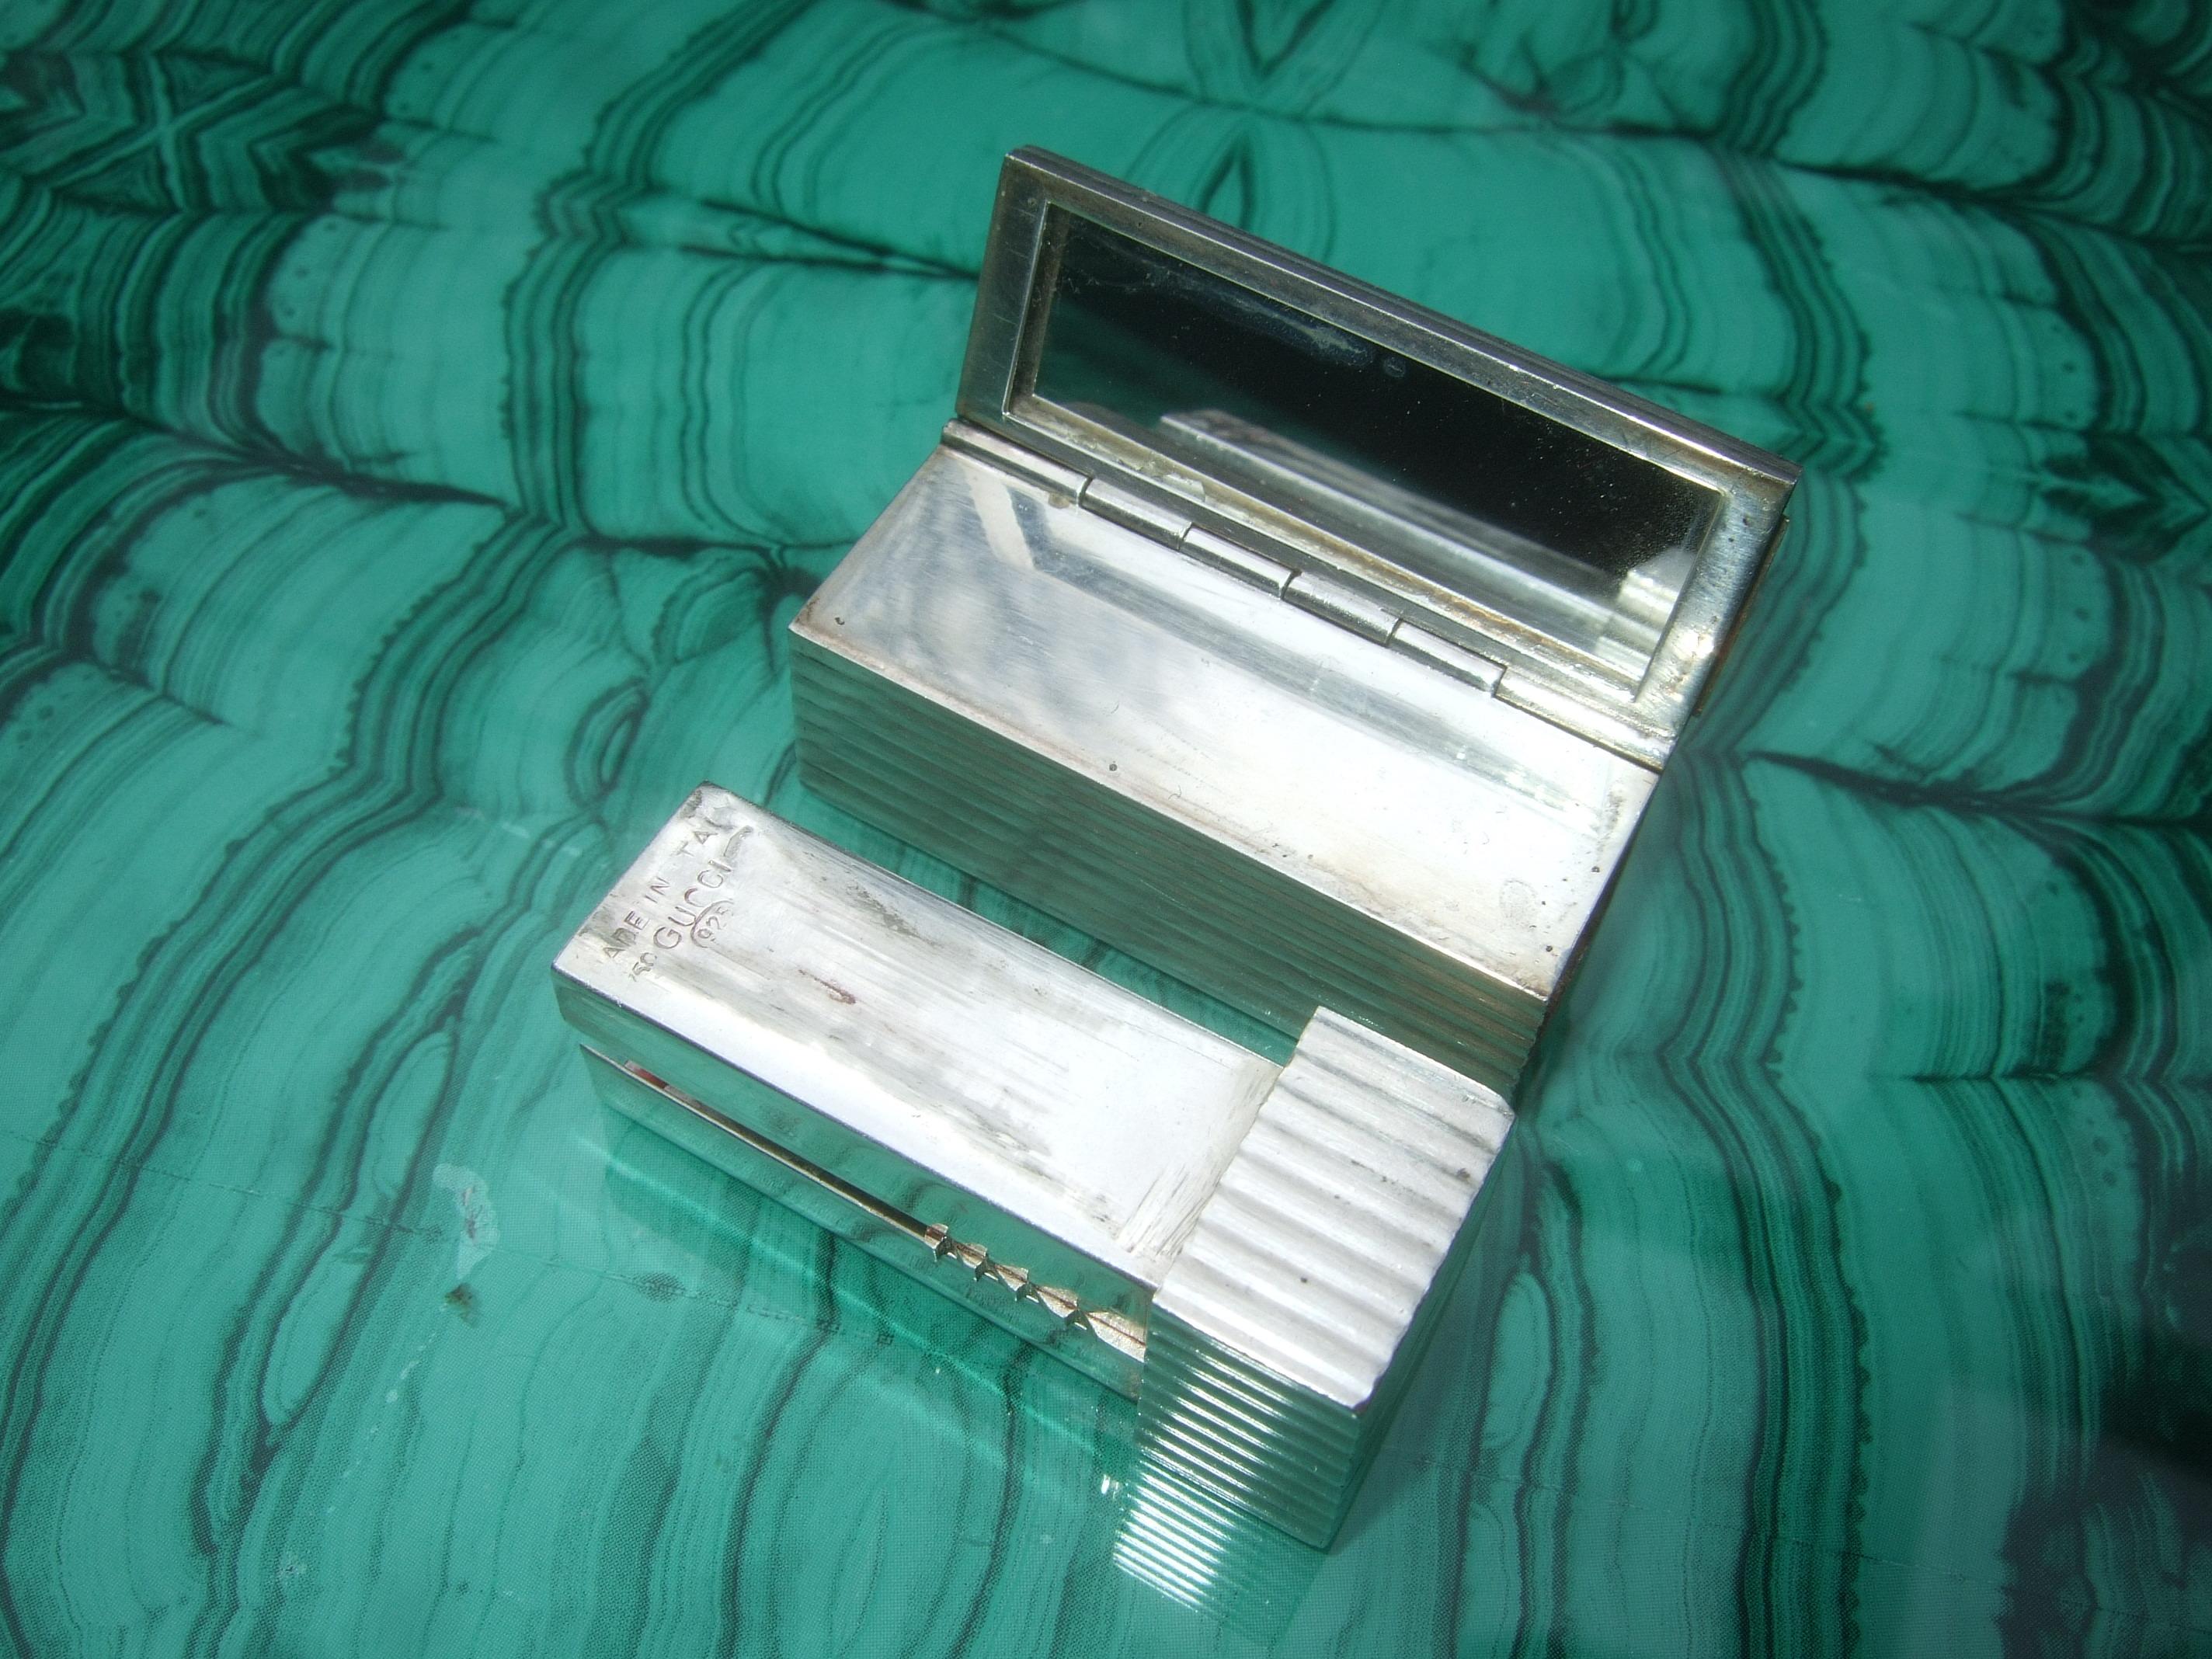 Gucci Italy Rare Sterling Silver Sleek Lipstick Vanity Mirror Case c 1970s For Sale 1